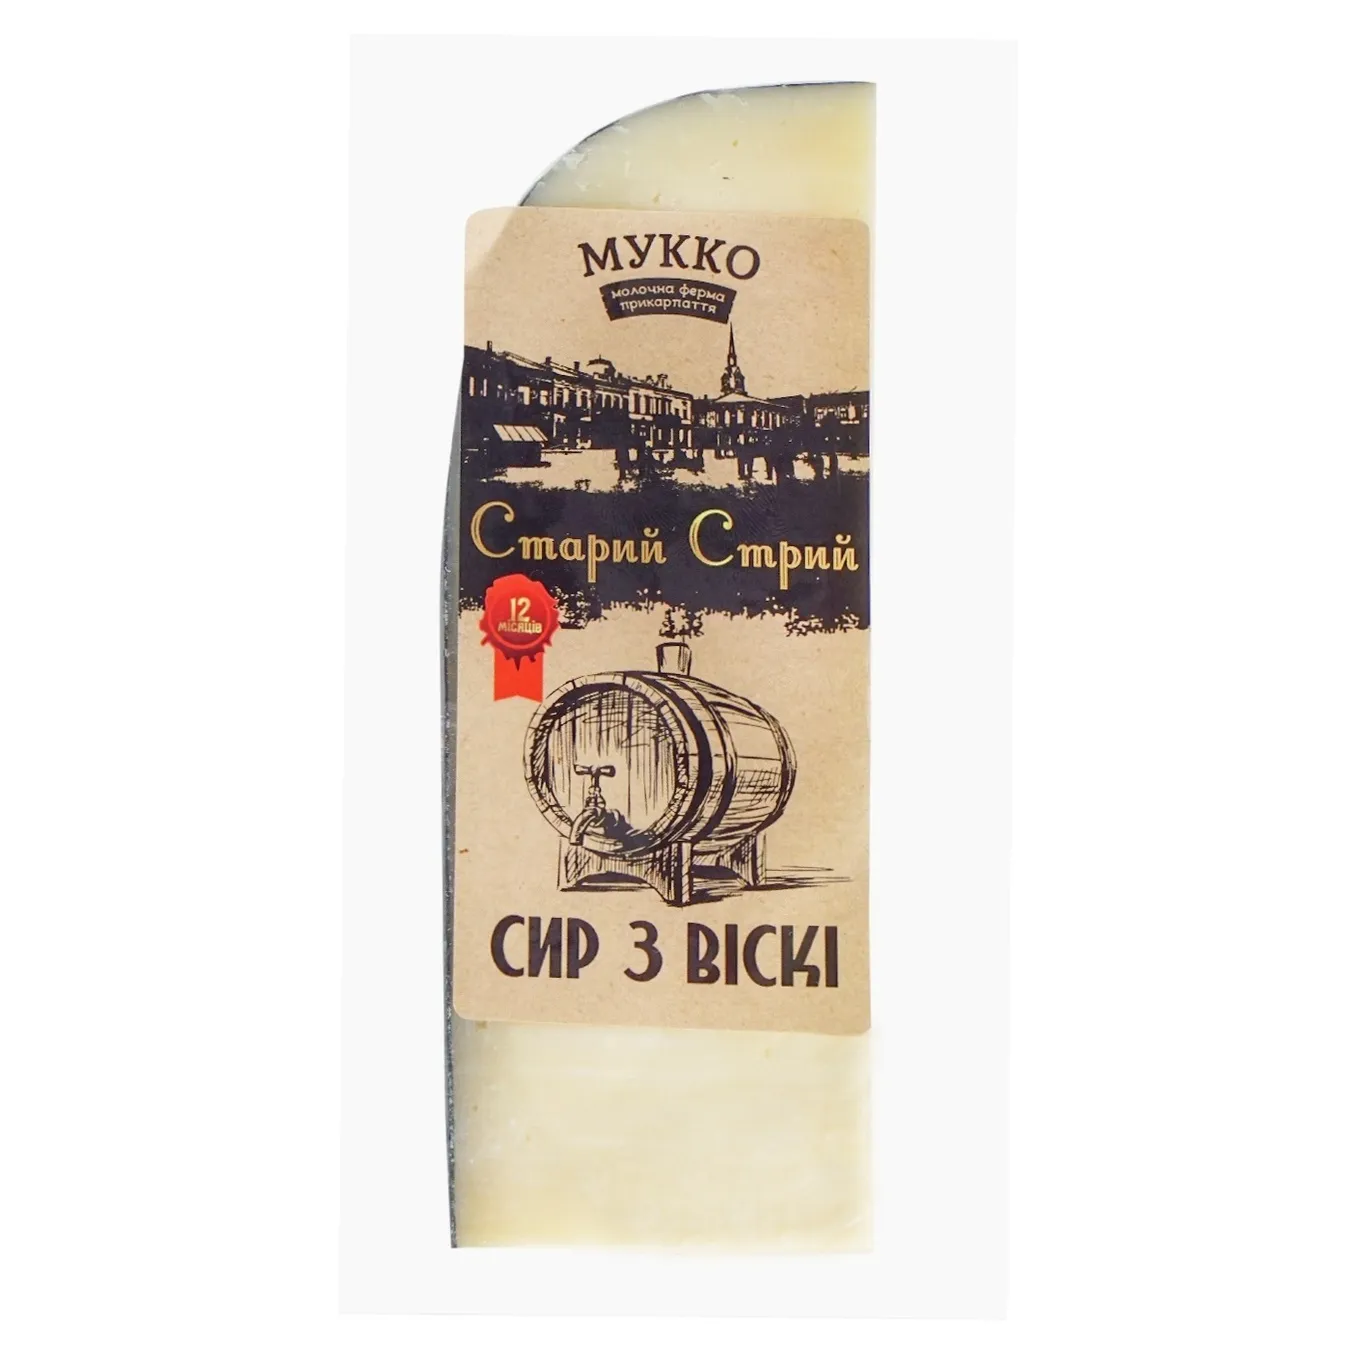 Mukko Old Stryi cheese with Whiskey 42.5%